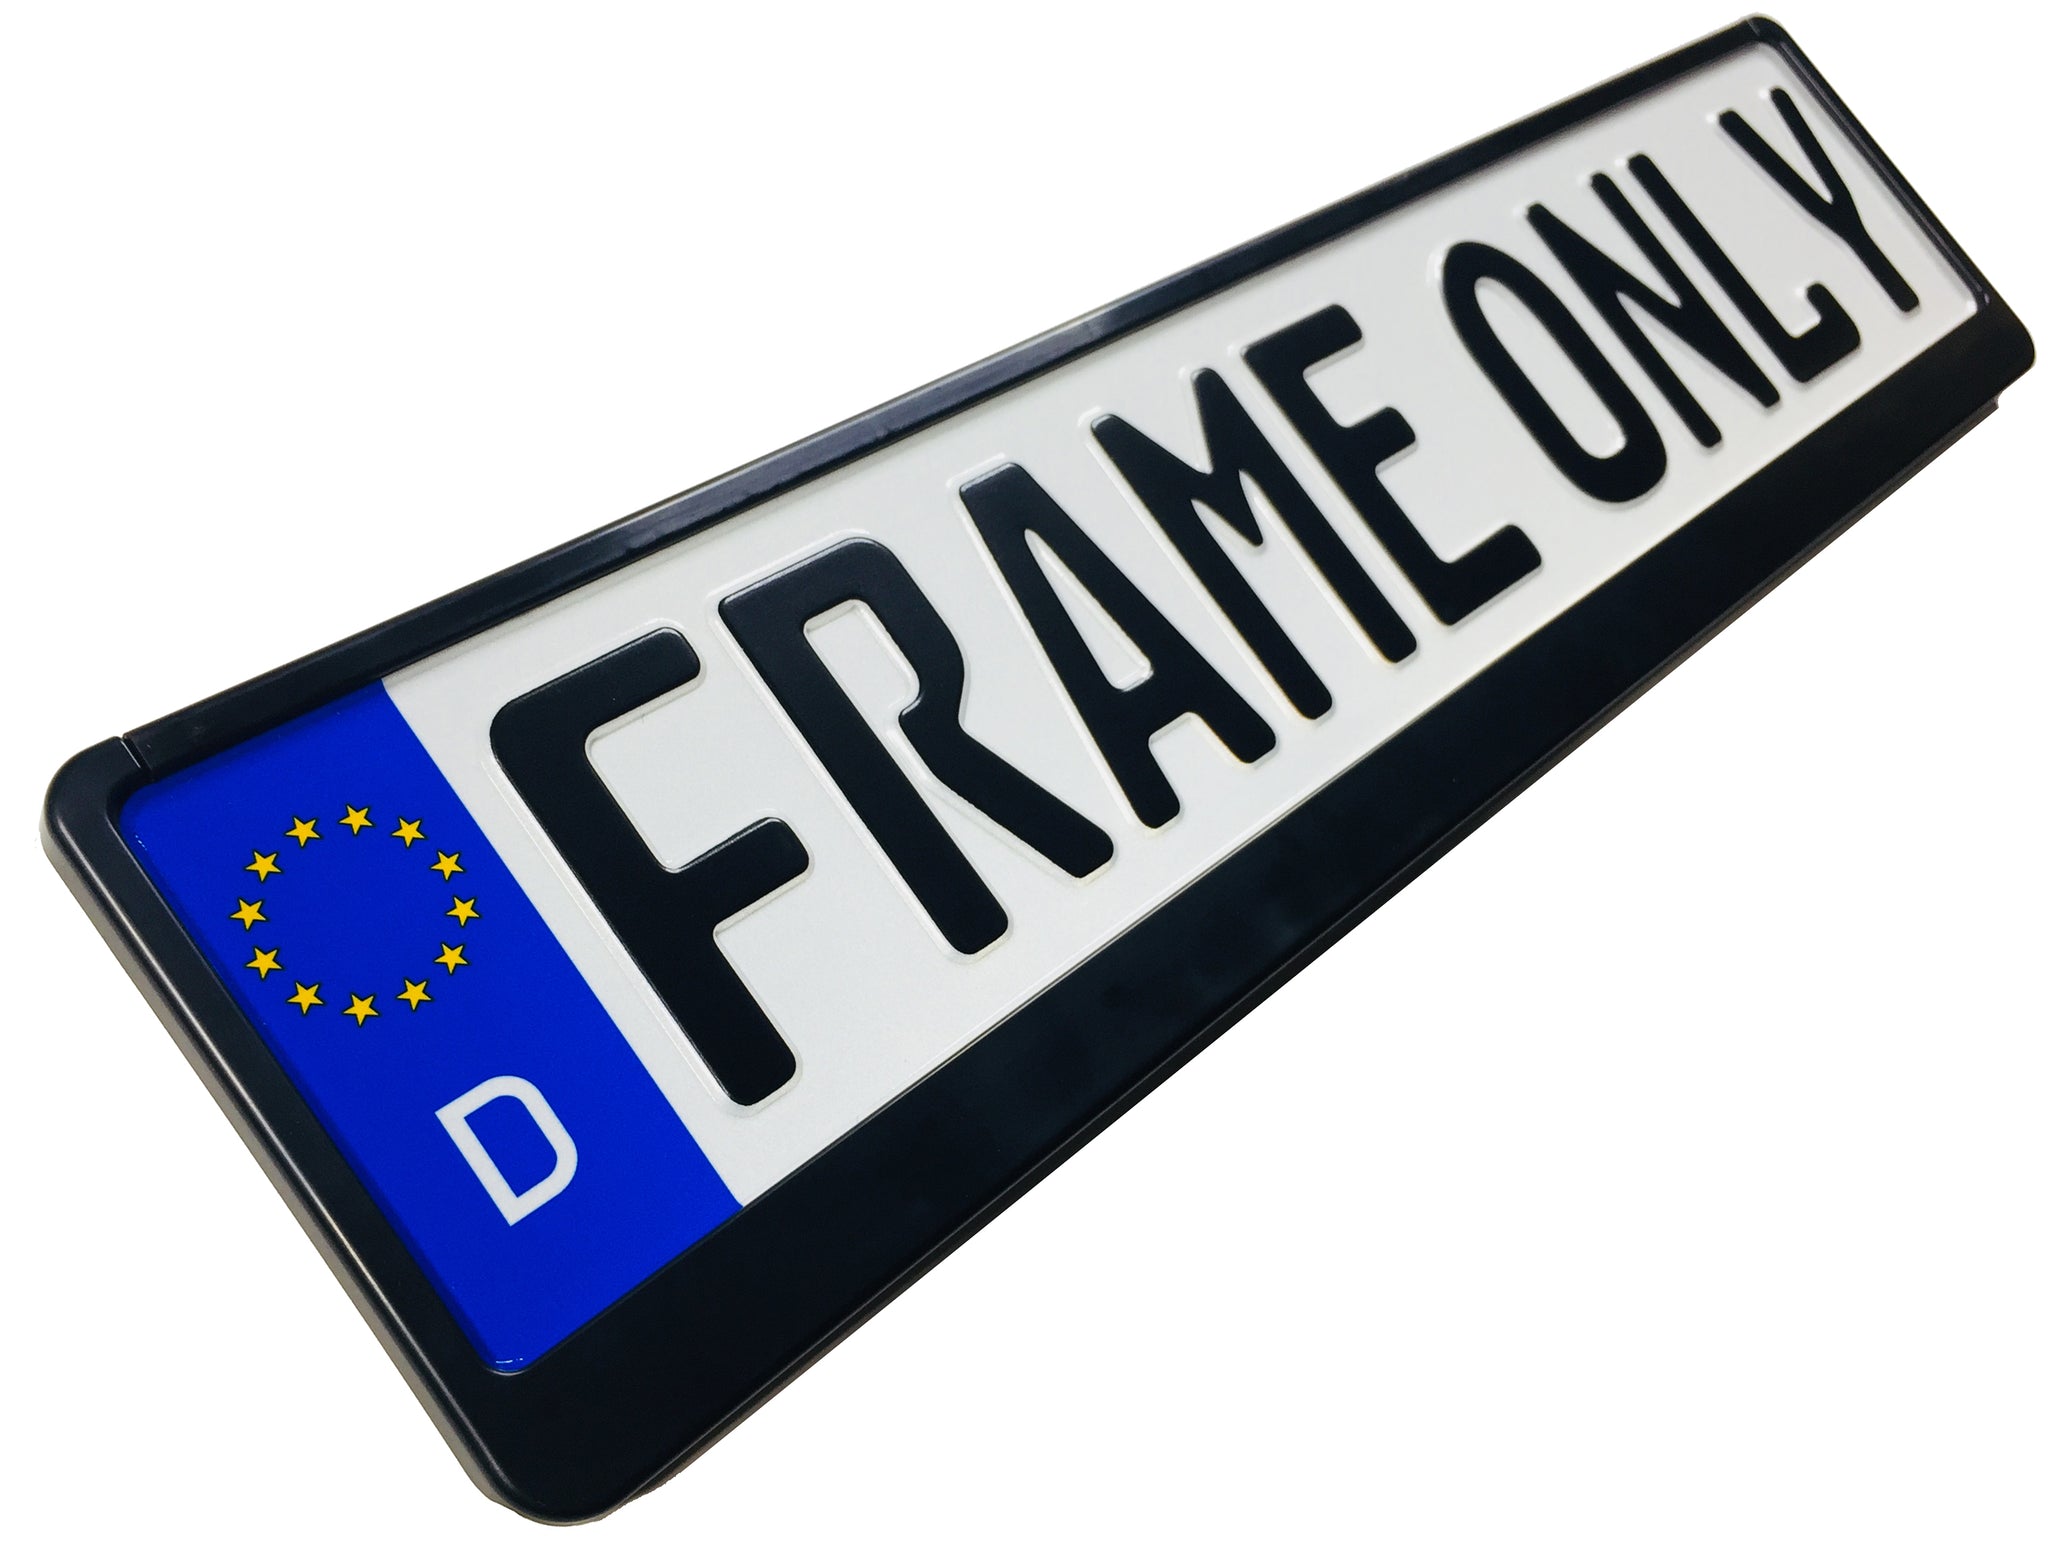 High quality license plate holder - Made in Germany - WWW